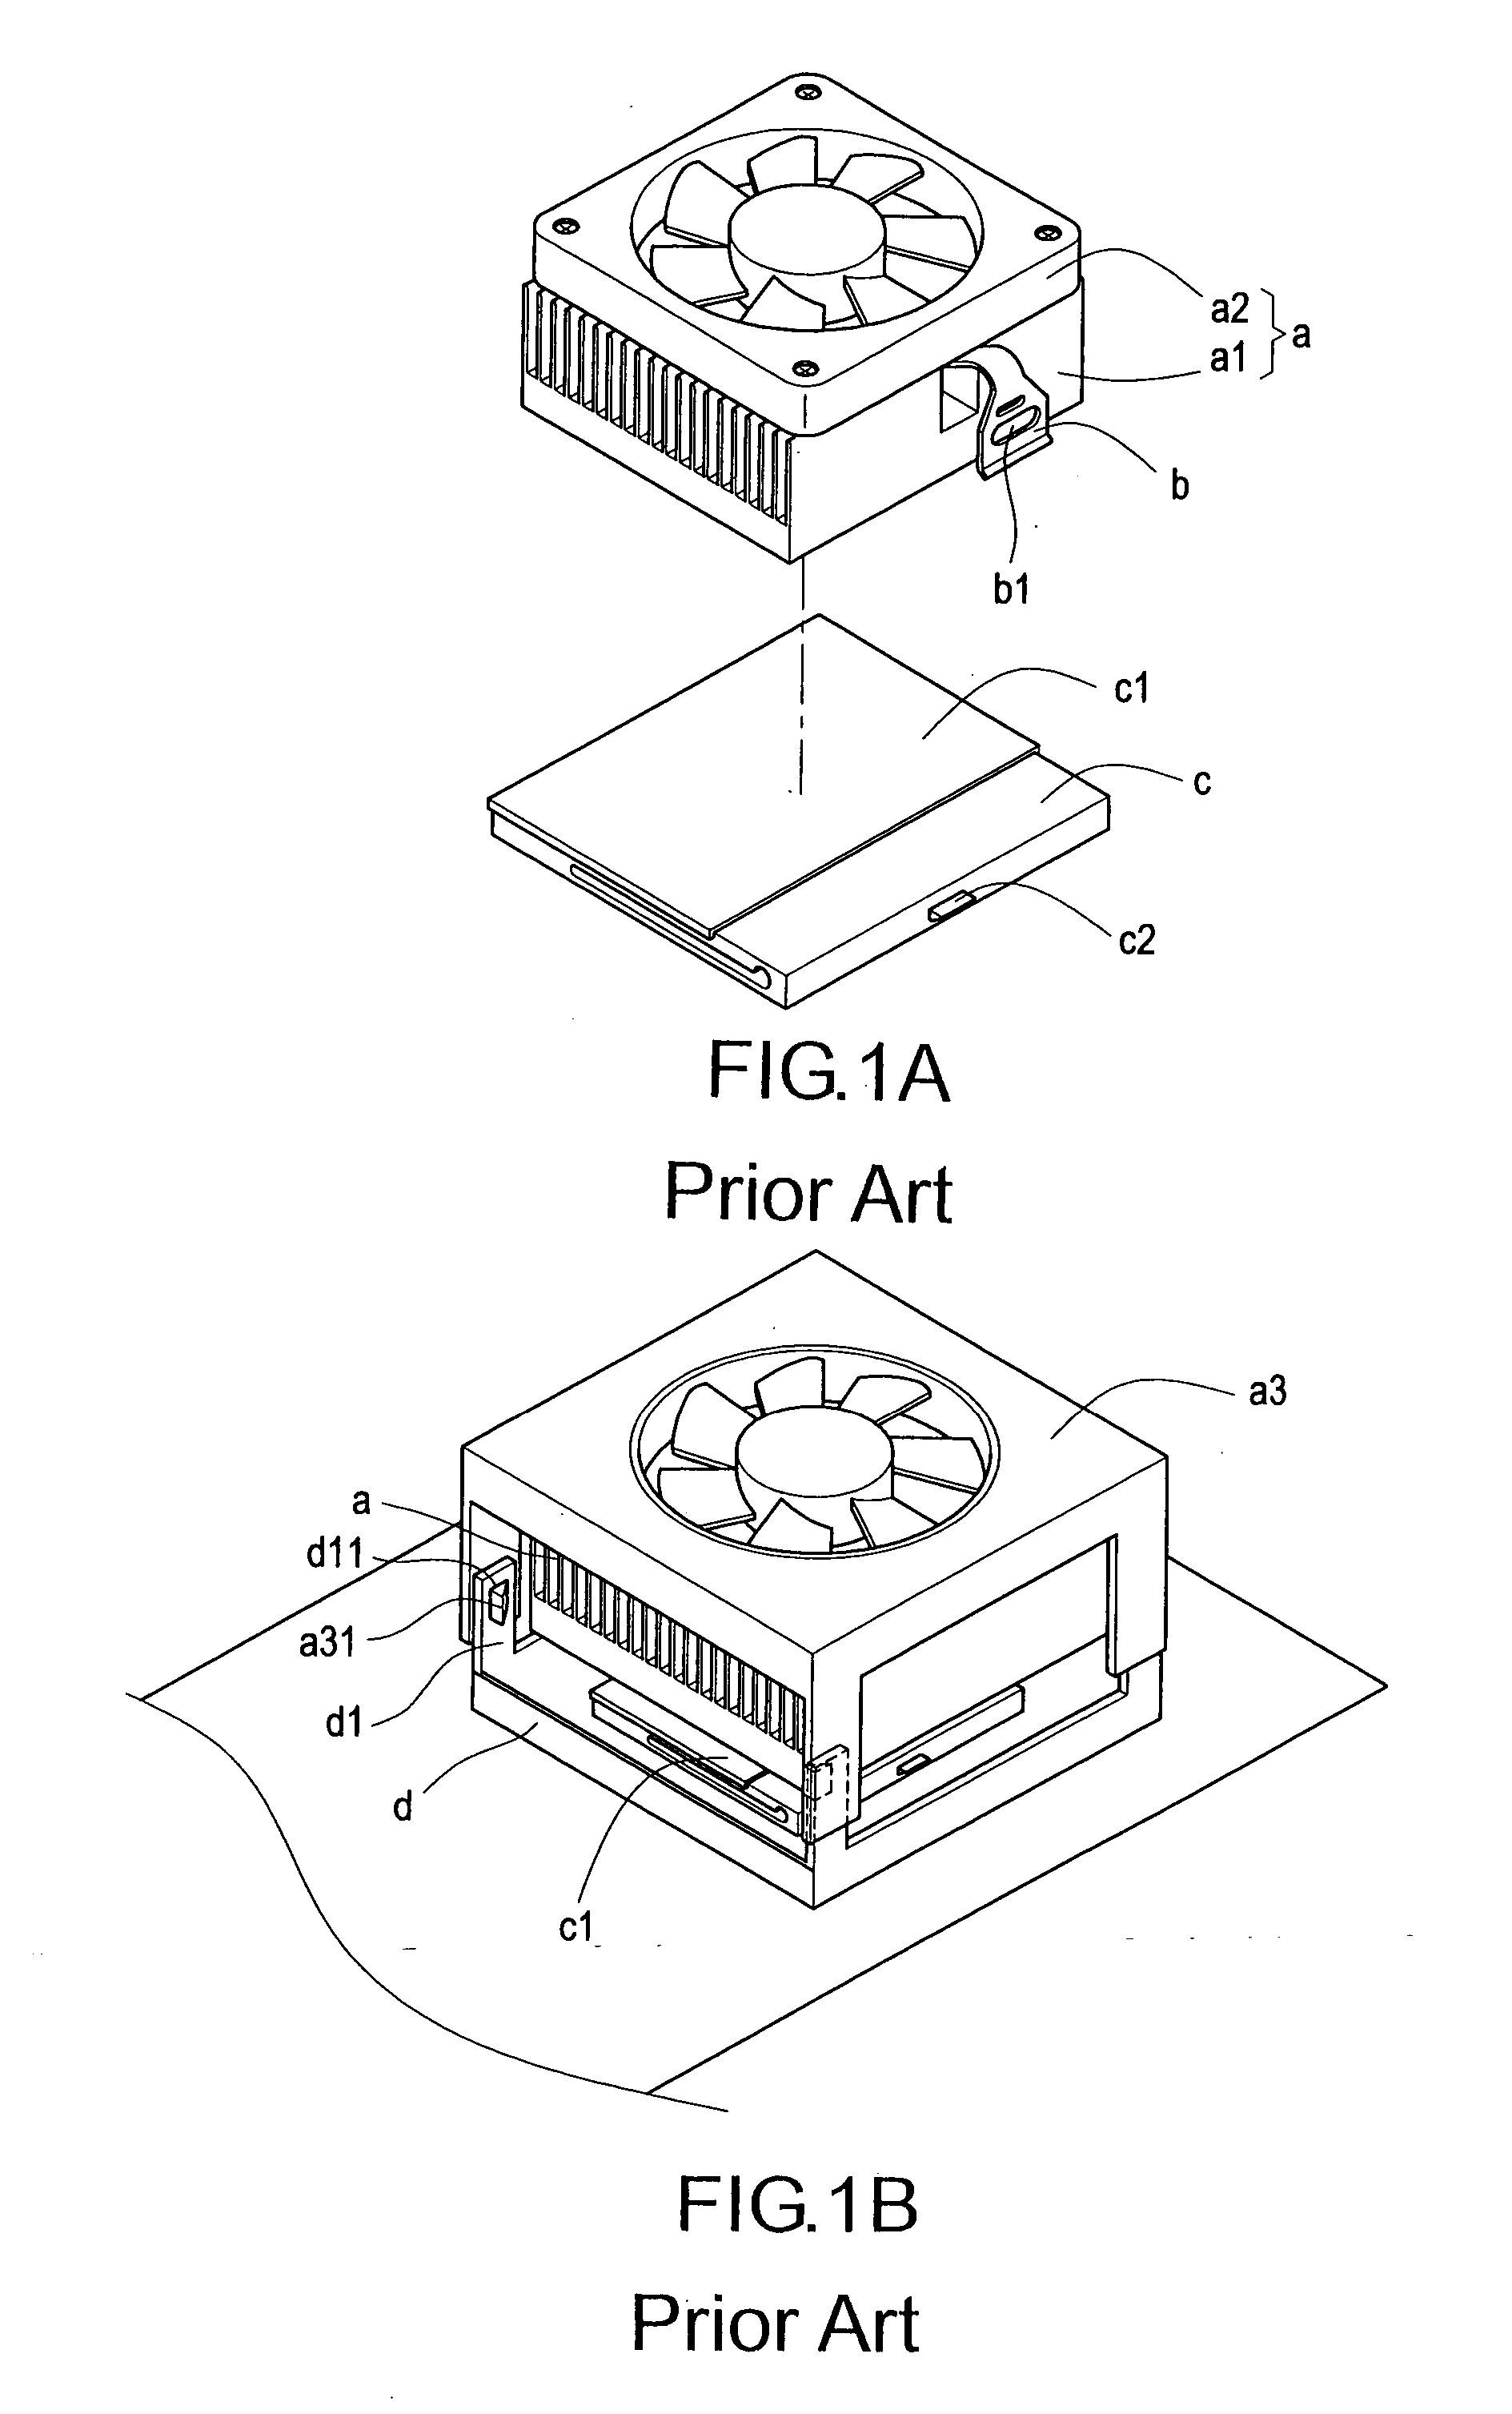 Fan stand structure for central processing unit